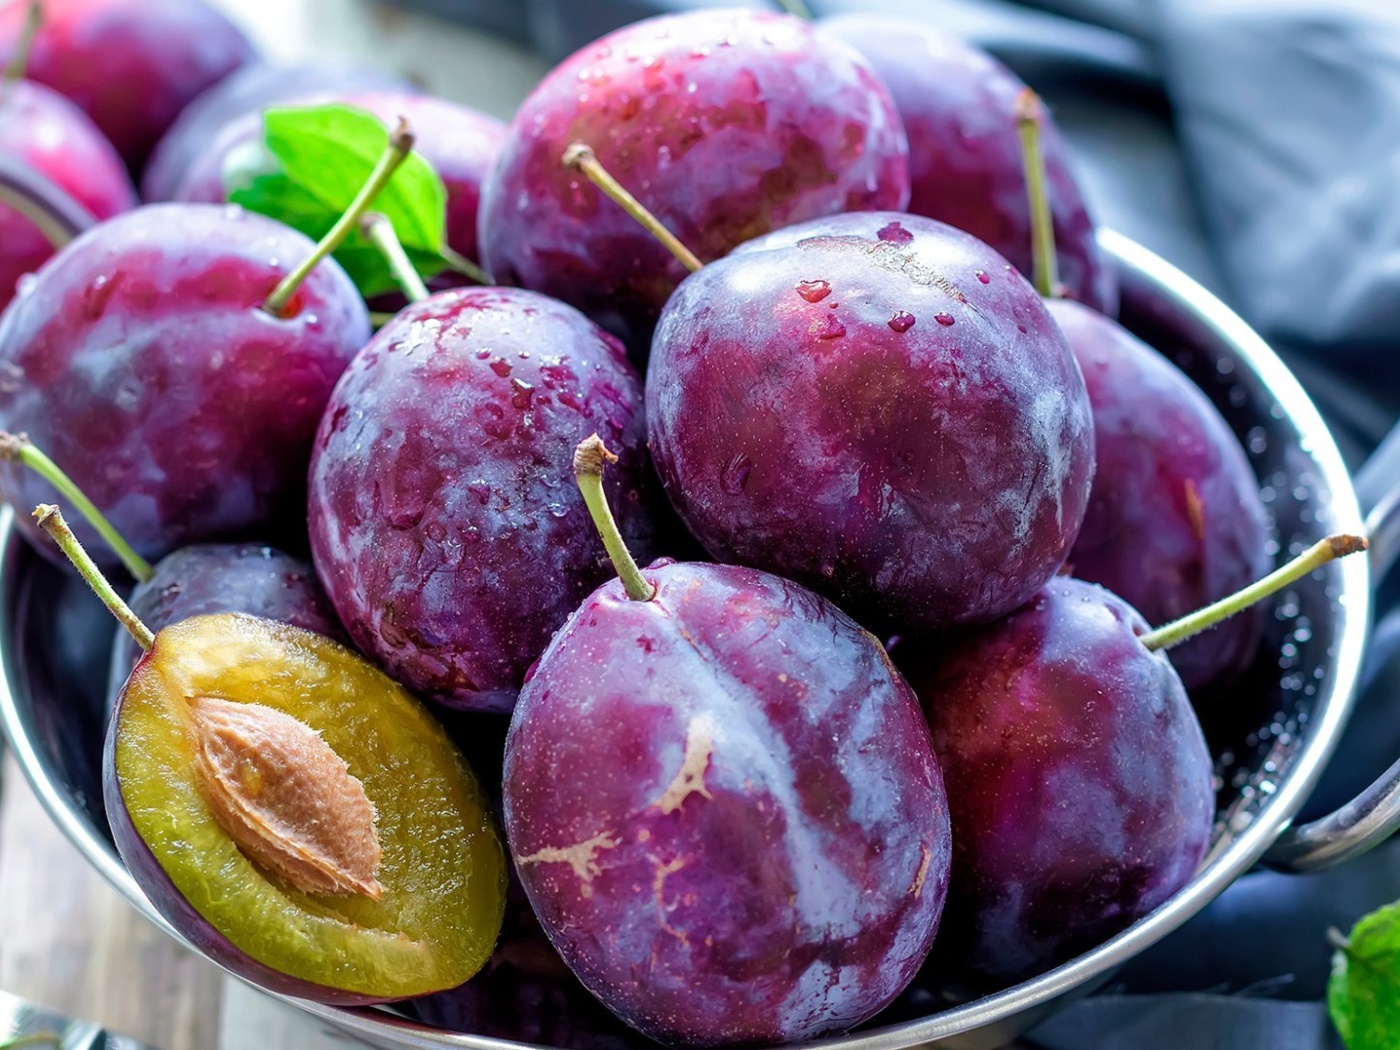 Plums with Vitamins wallpaper 1400x1050